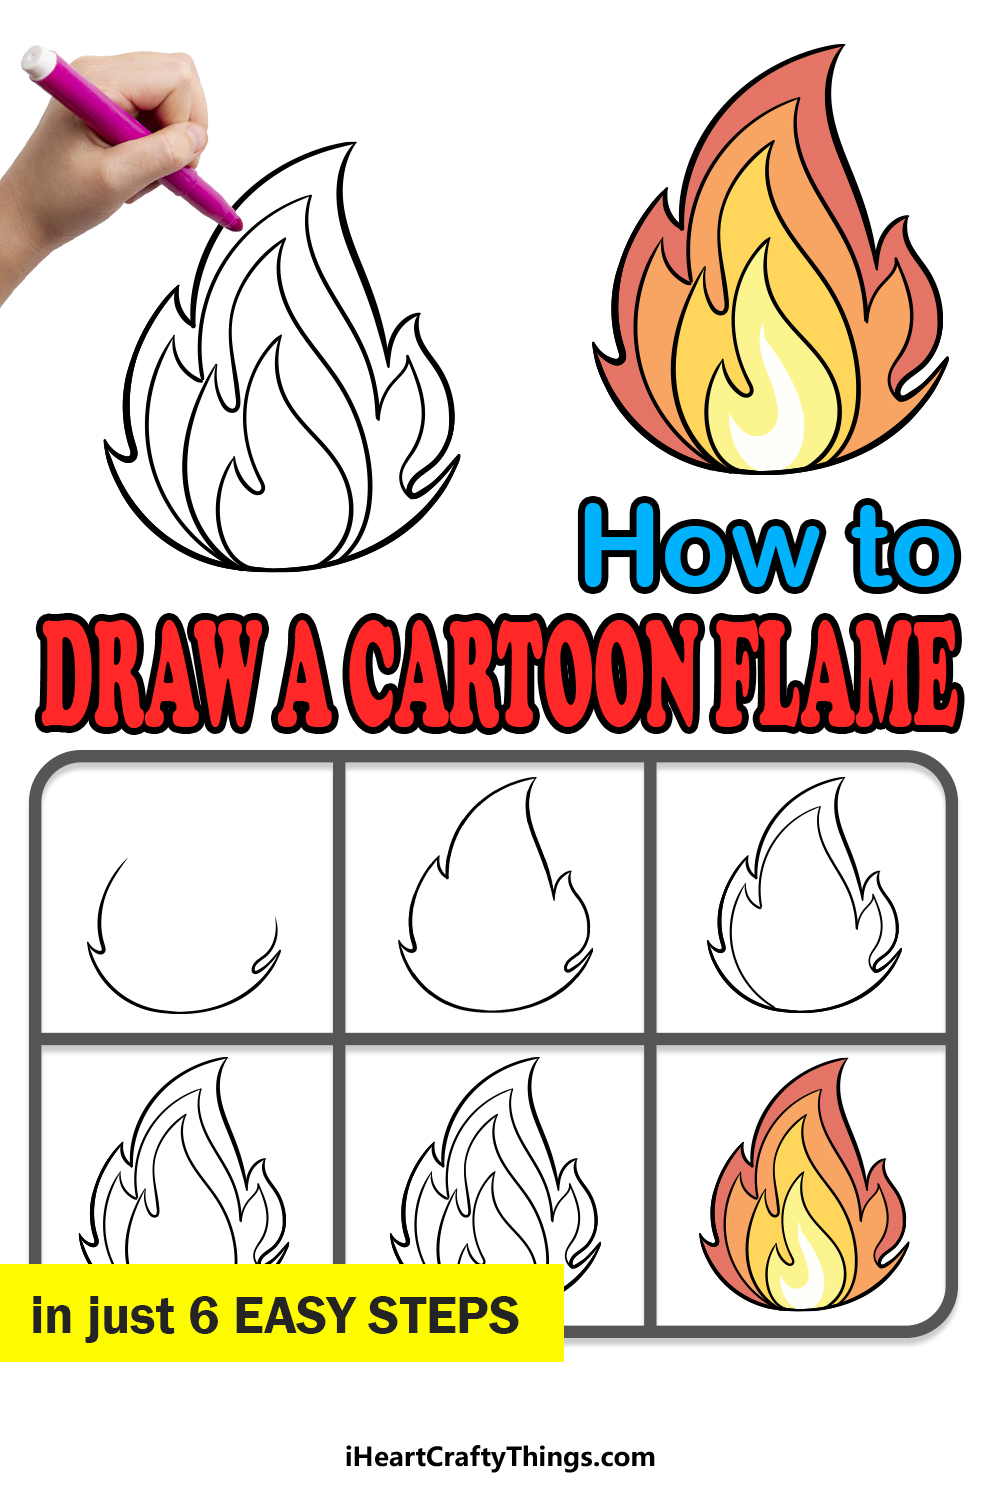 how to draw a cartoon flame in 6 easy steps